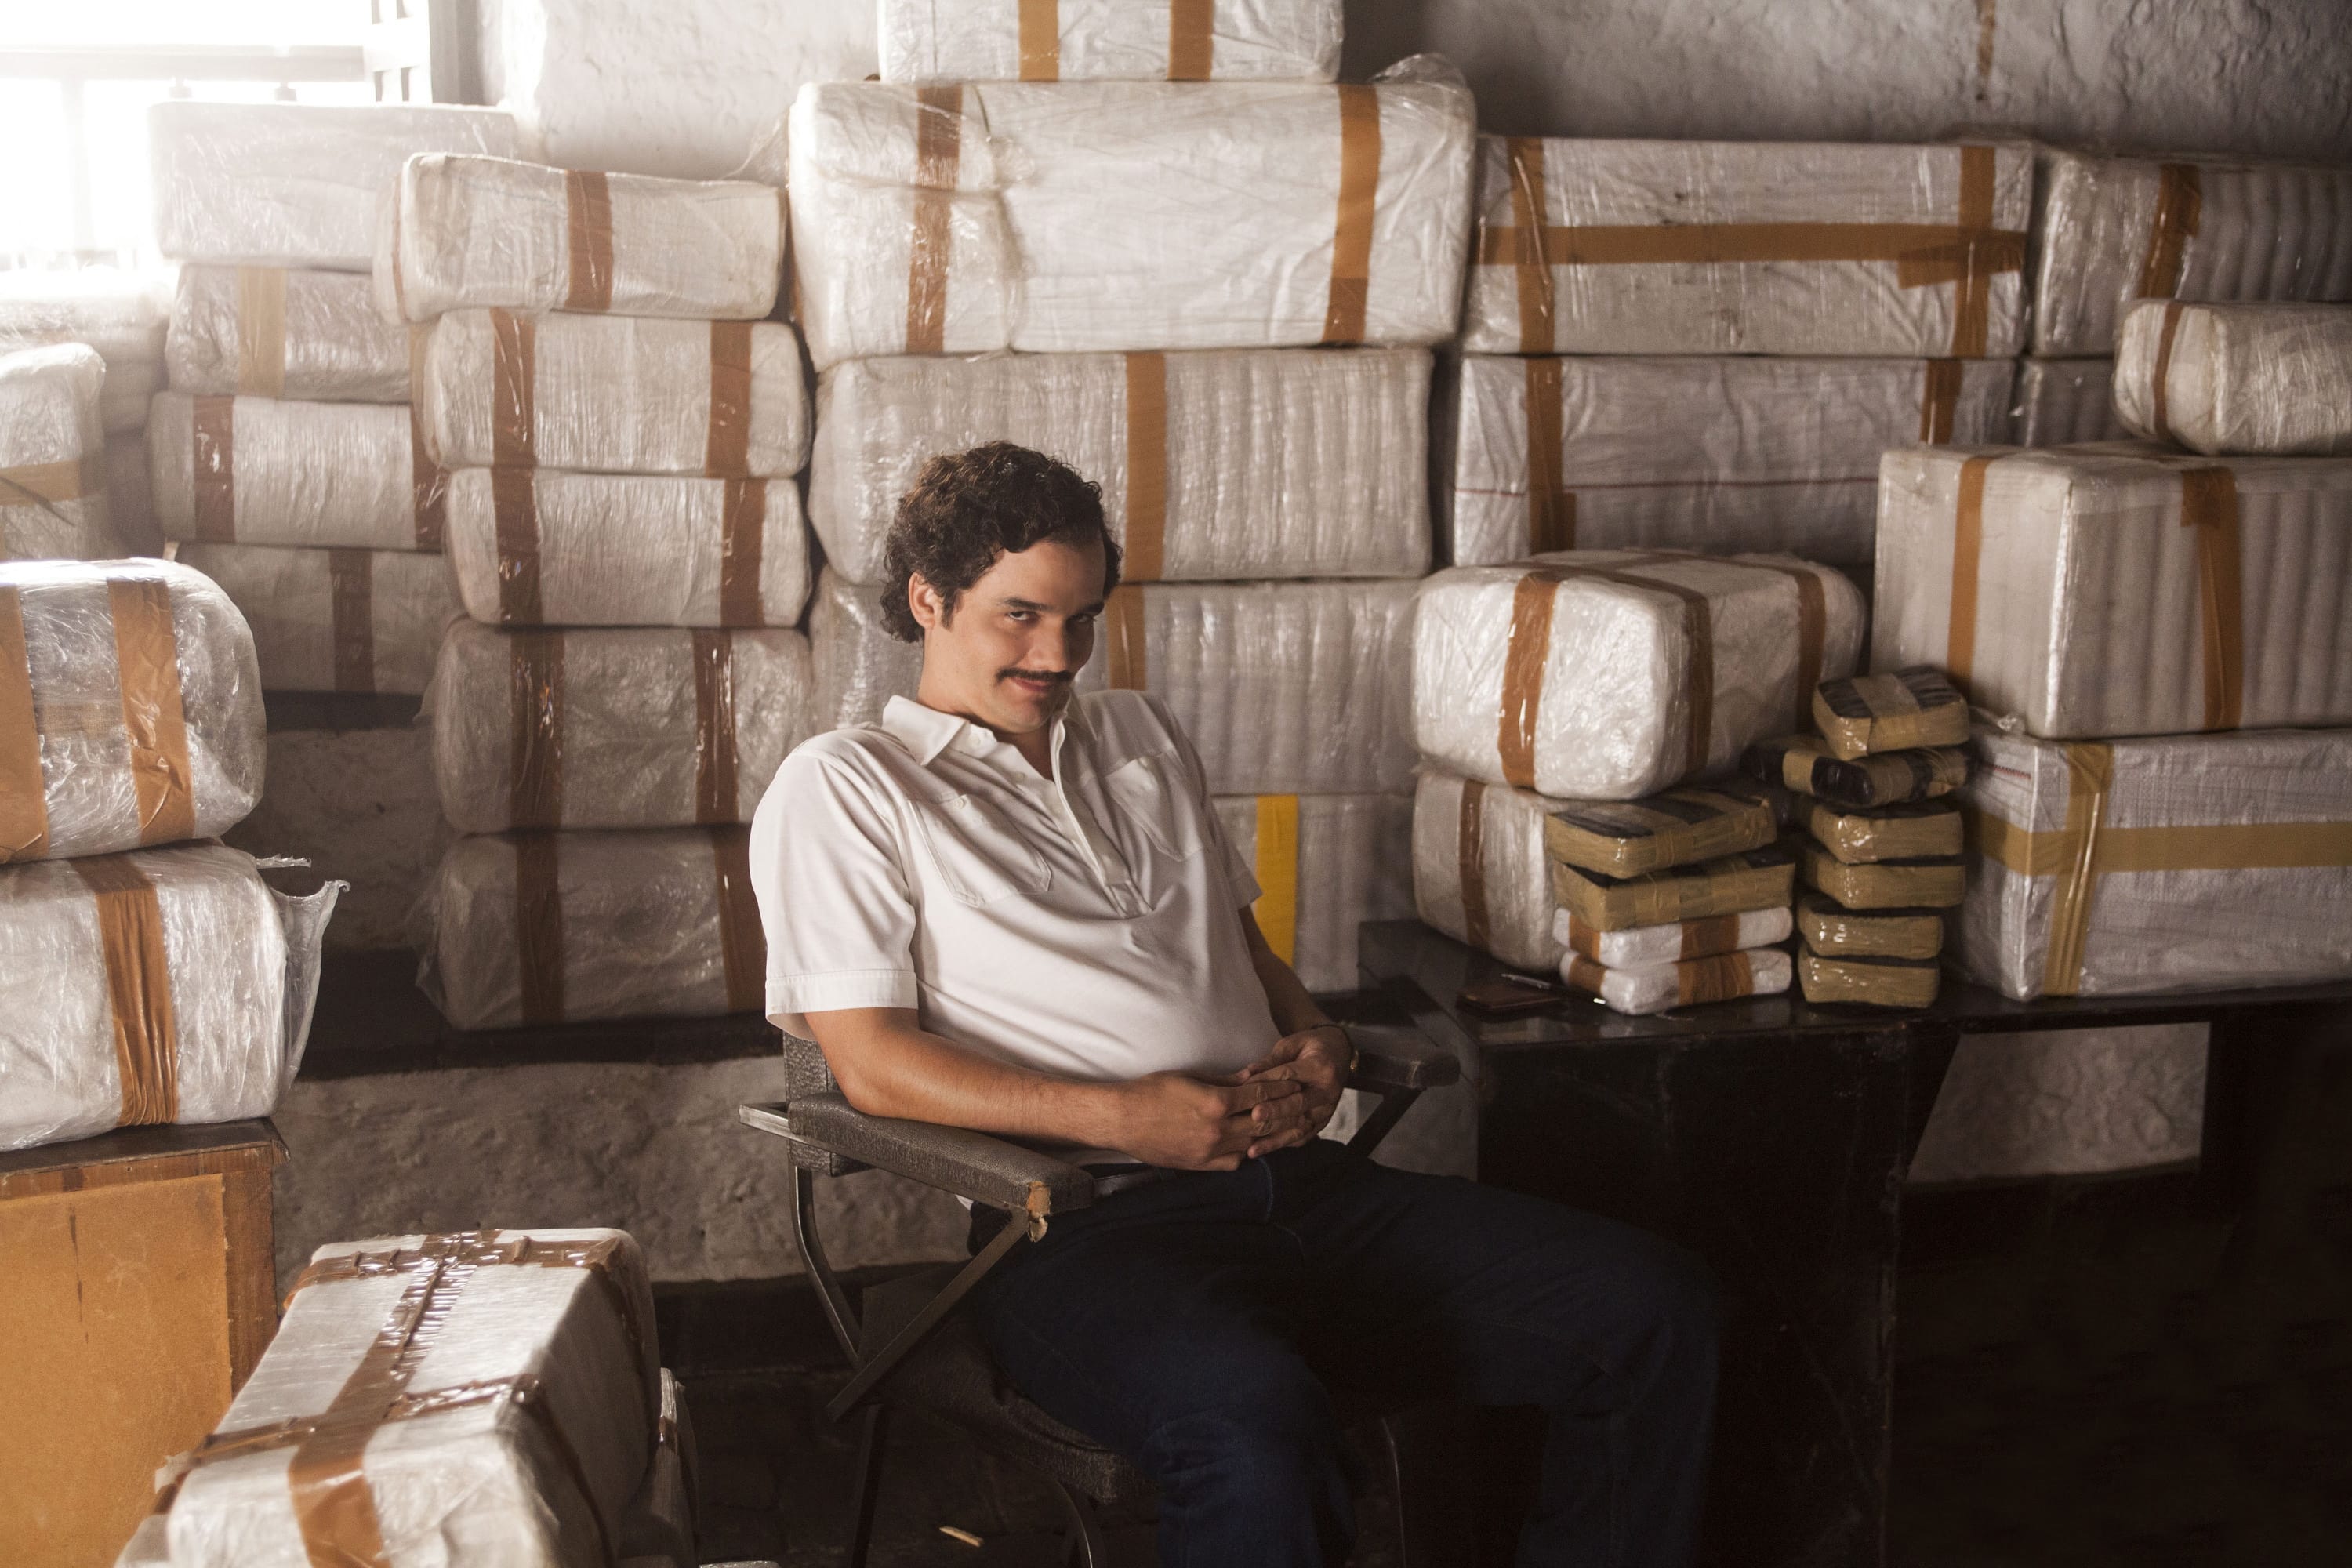 This undated production photo provided by Netflix shows, Wagner Moura as Pablo Escobar, in the Netflix Original Series &quot;Narcos.&quot; The biopic promises to be an authentic portrayal of Escobar, so it&iacute;s only natural that Brazilian director and executive producer Jose Padilha chose to film the 10-episode series in Medellin, the murder capital of the world during the drug kingpin&iacute;s heyday in the 1980s.